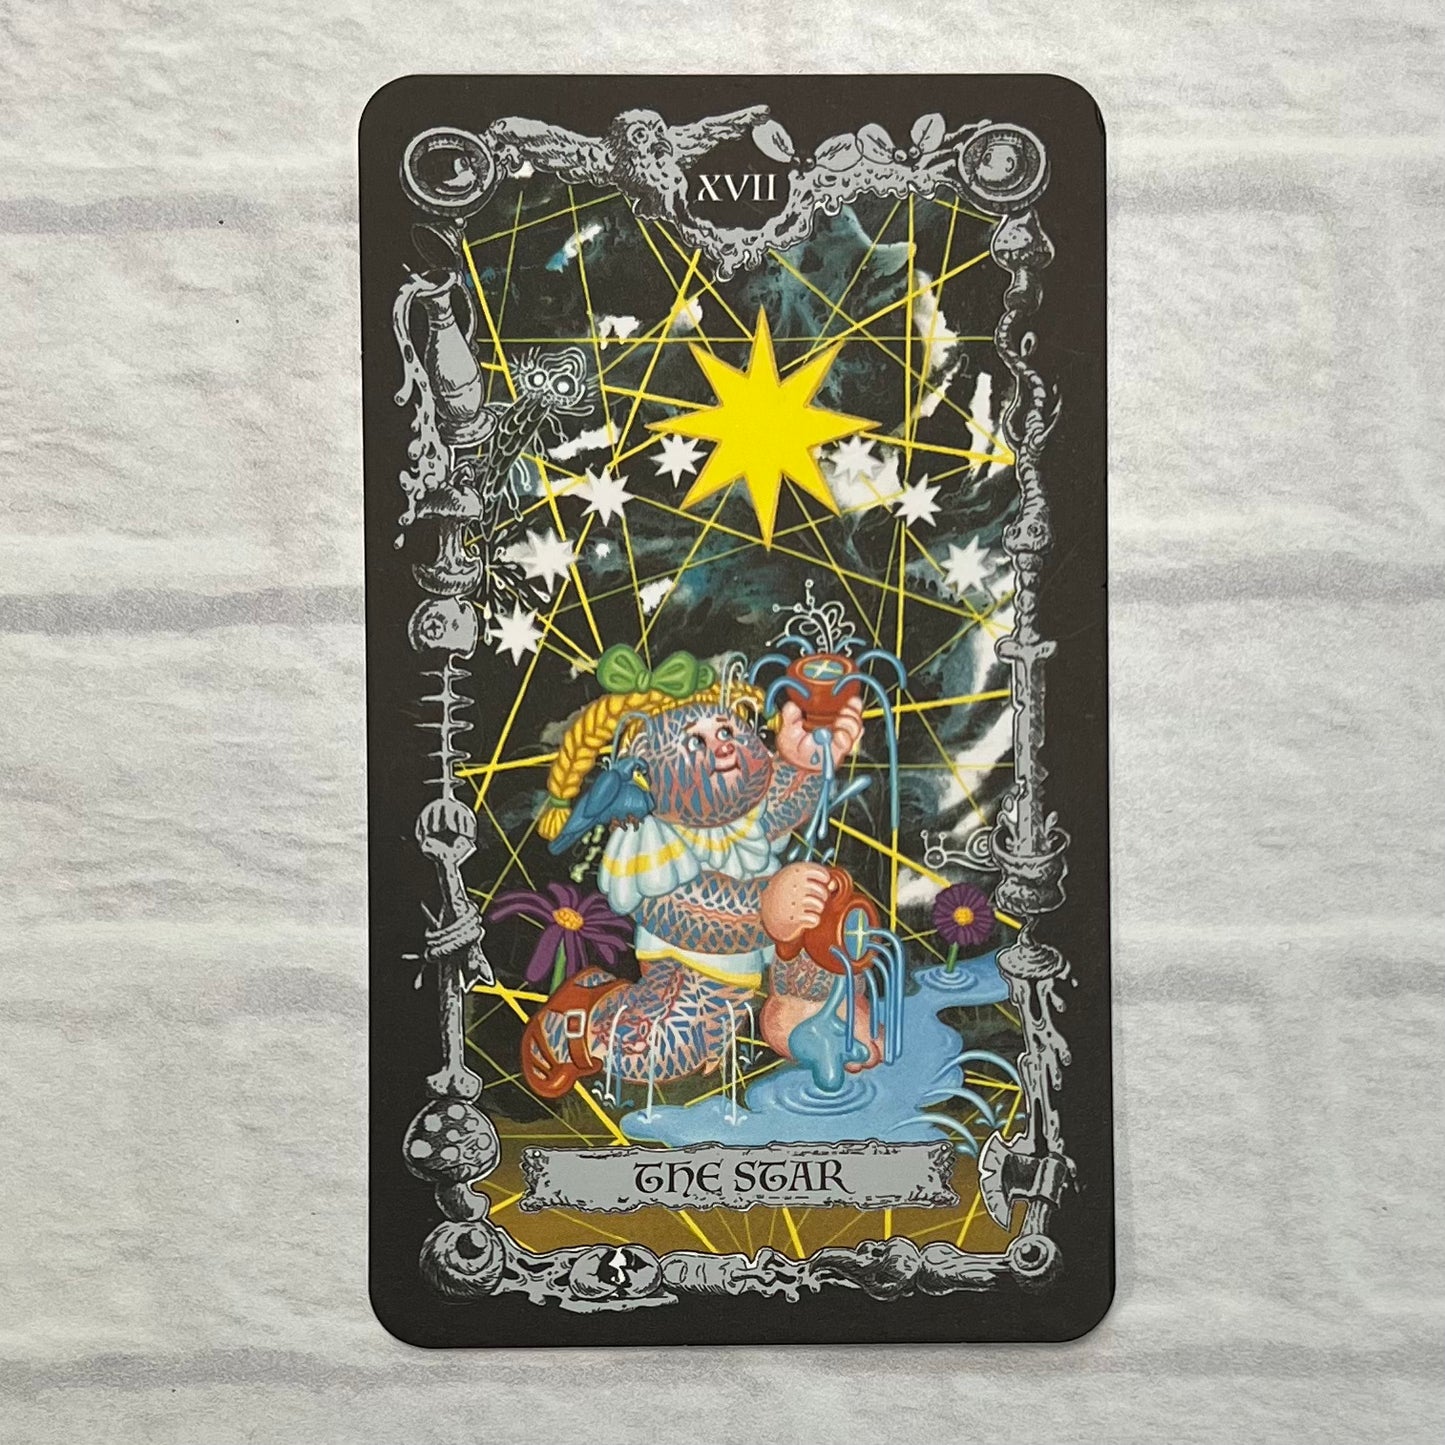 Garbage Pail Kids: The Official Tarot Deck and Guidebook by Miriam Kim